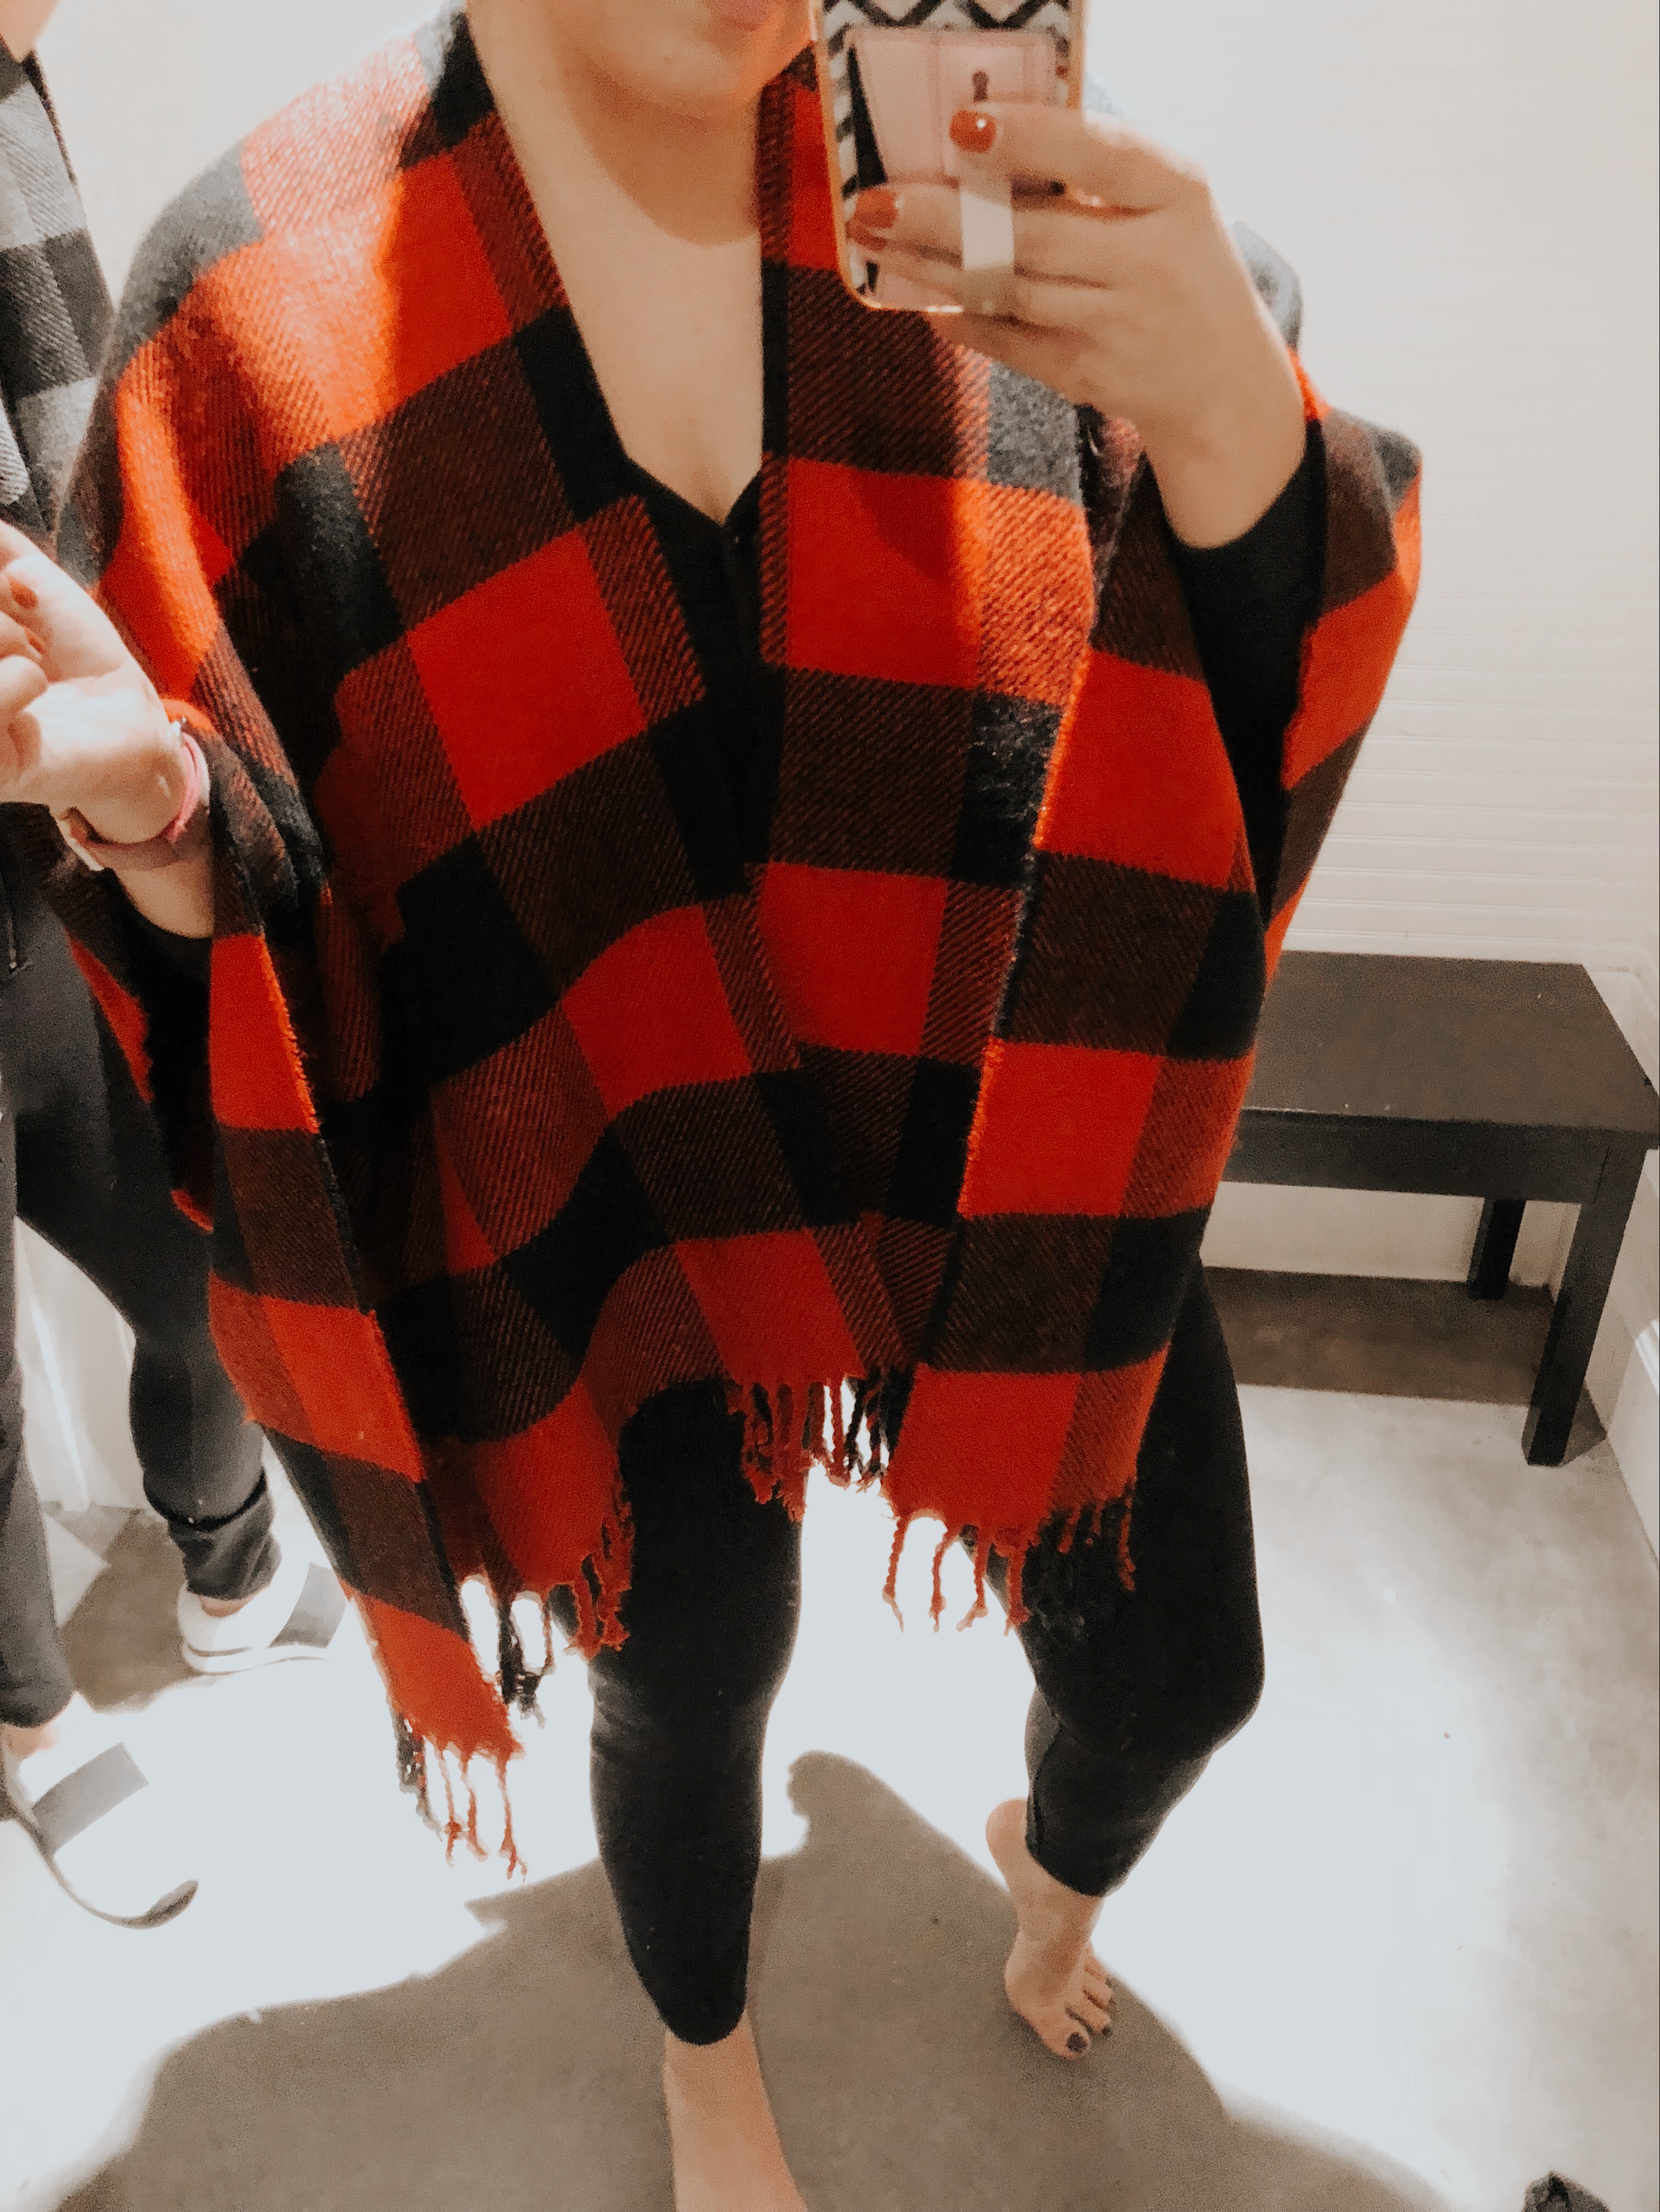 San Francisco Blogger, Ashley Zeal, from Two Peas in a Prada takes you inside the dressing room for an Abercombie Try On Session.